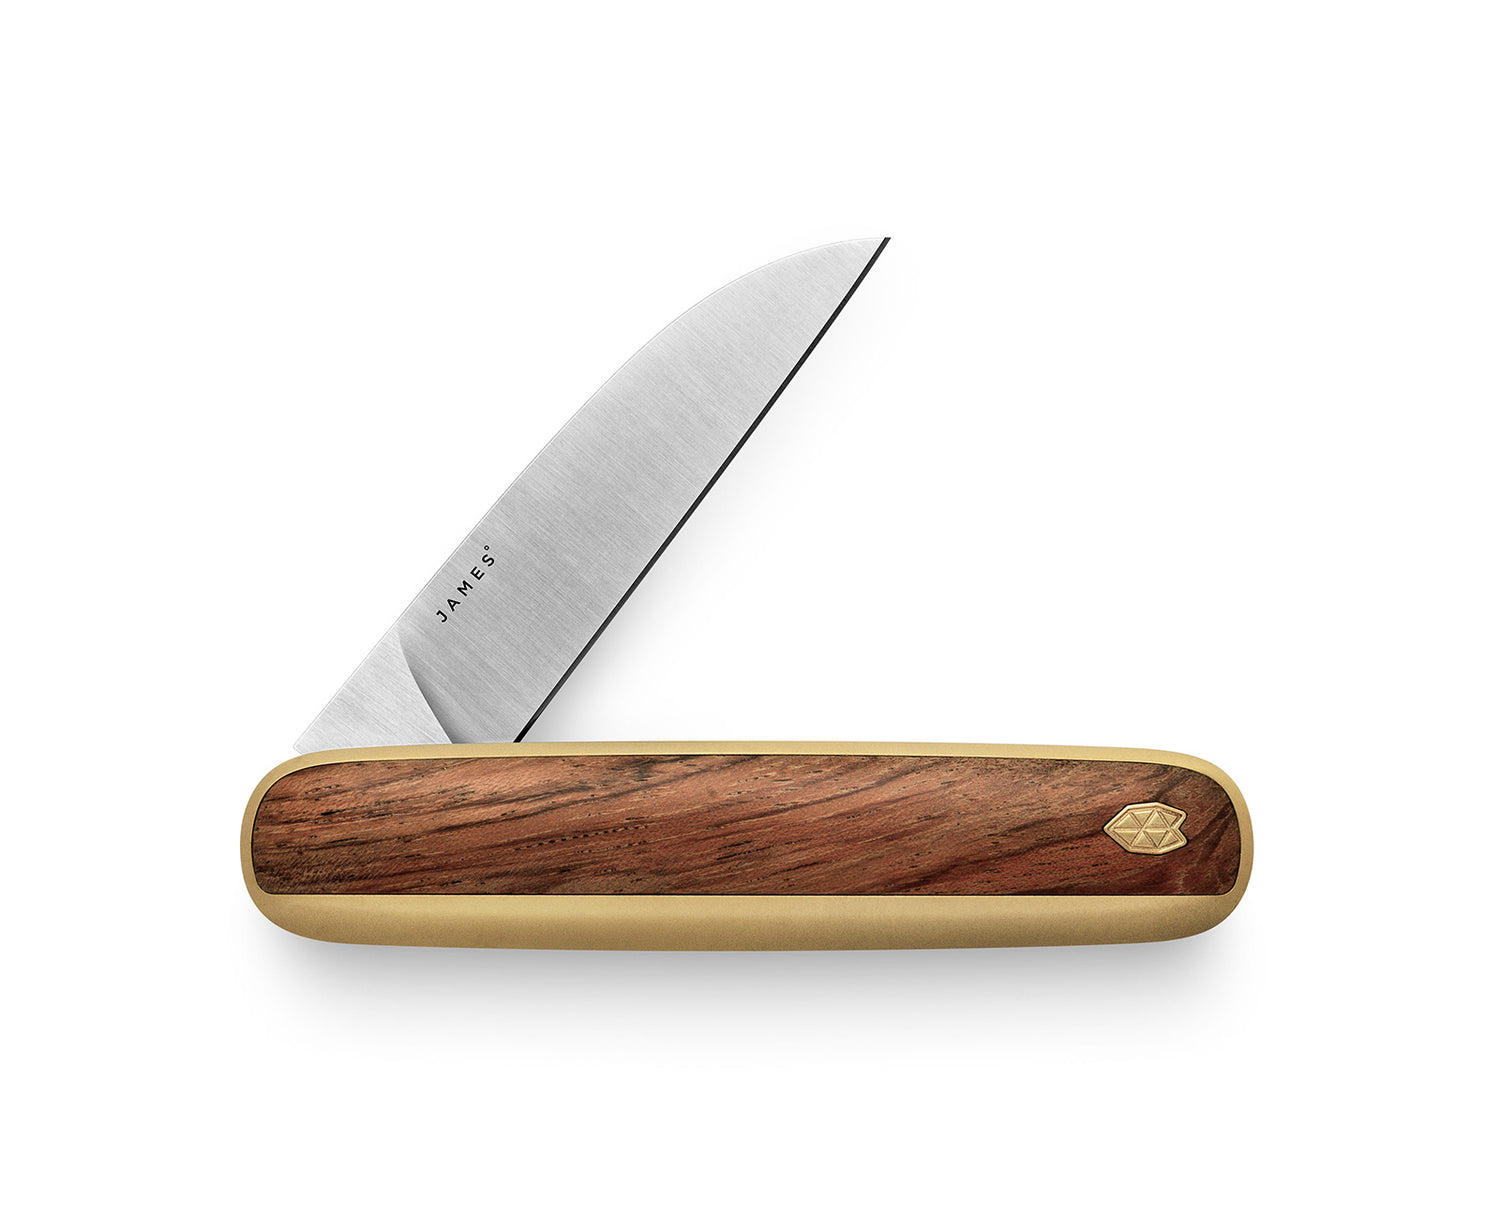 The Pike knife with rosewood and brass handle and stainless steel blade